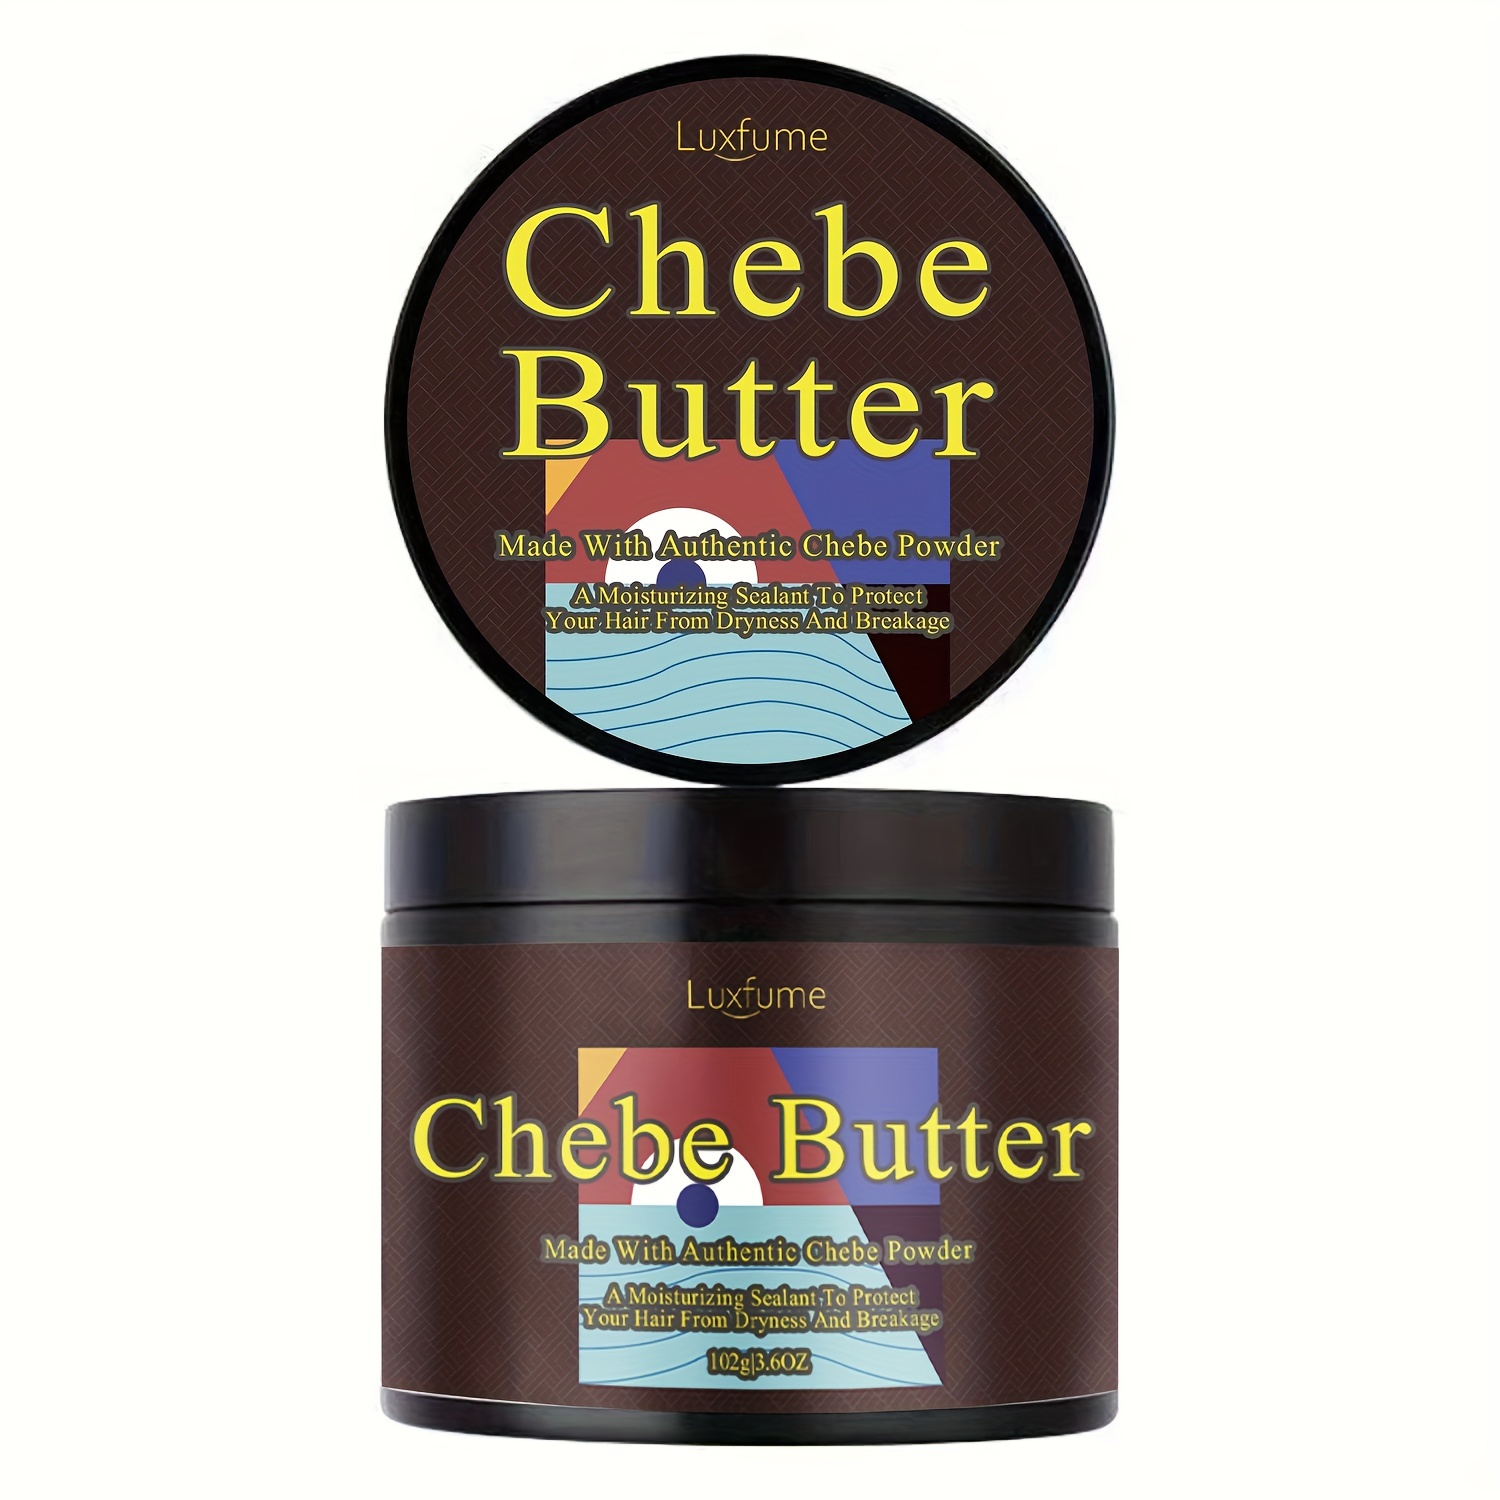 

Chebe Hair Butter, Hair Care Chebe Butter Made With Chebe Powder, Castor Oil, Shea Butter, Hair Products Oil Butter For All Hair Types